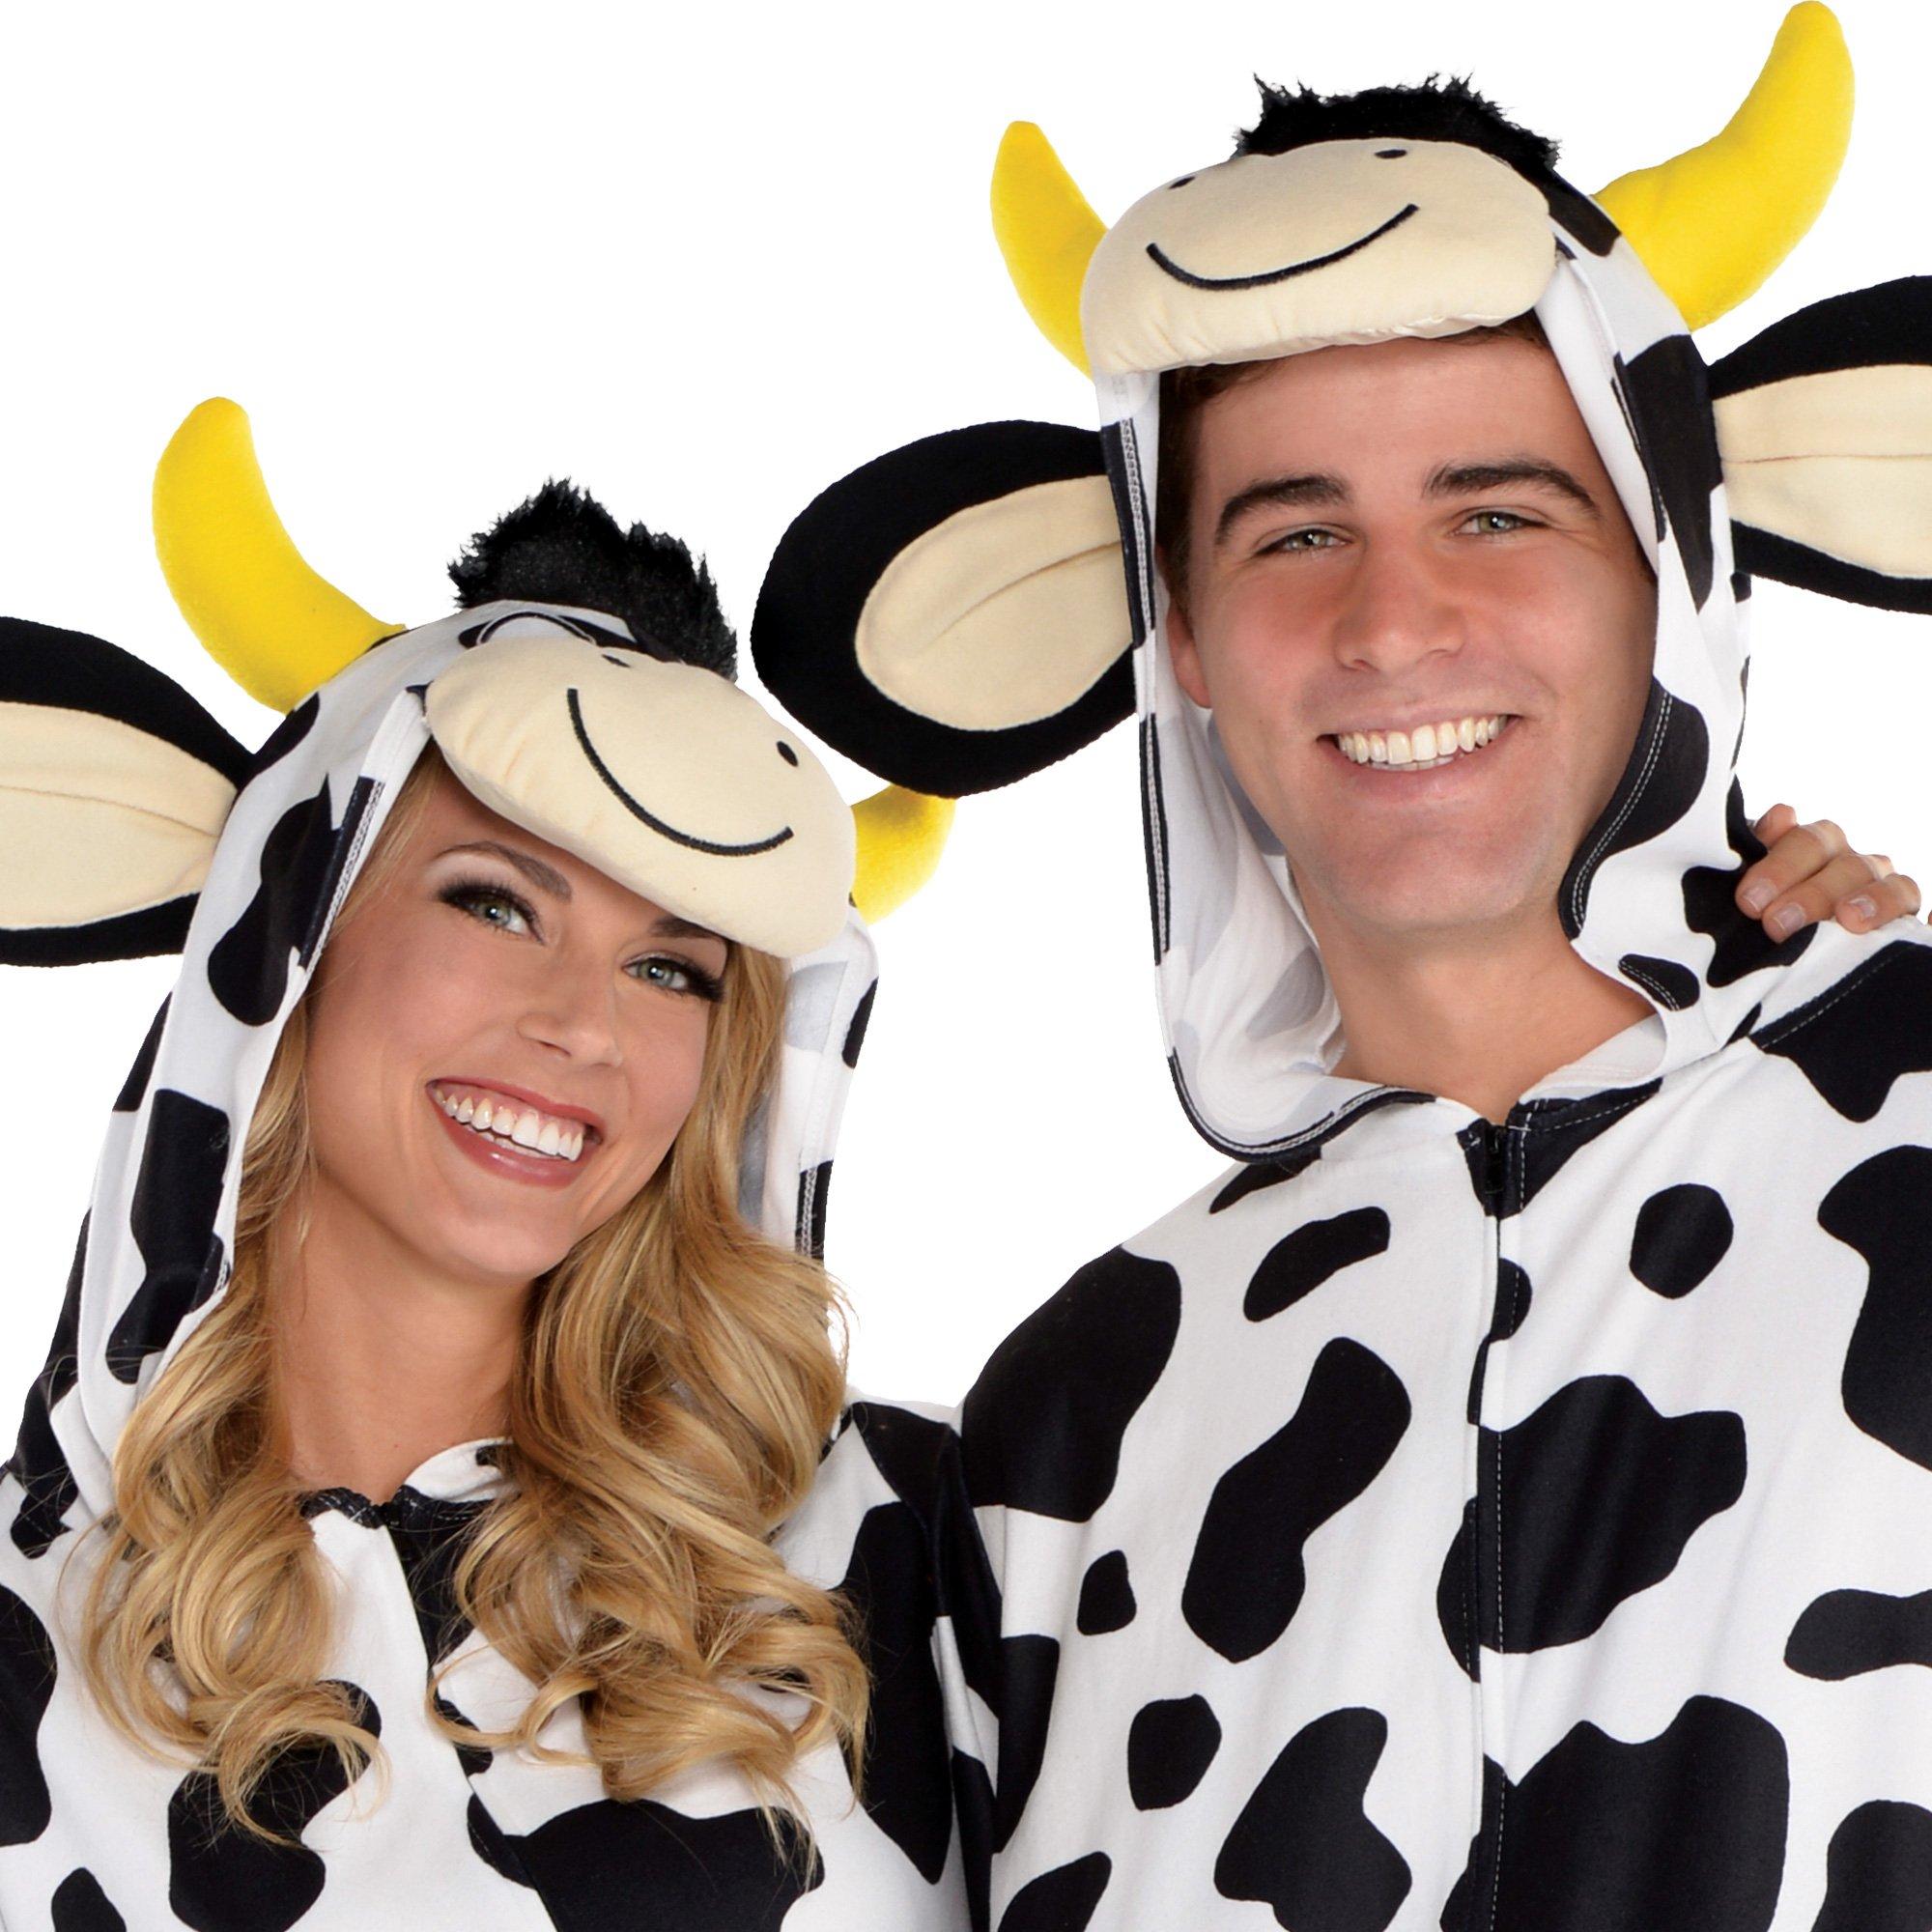 Adult Zipster Cow One Piece Costume